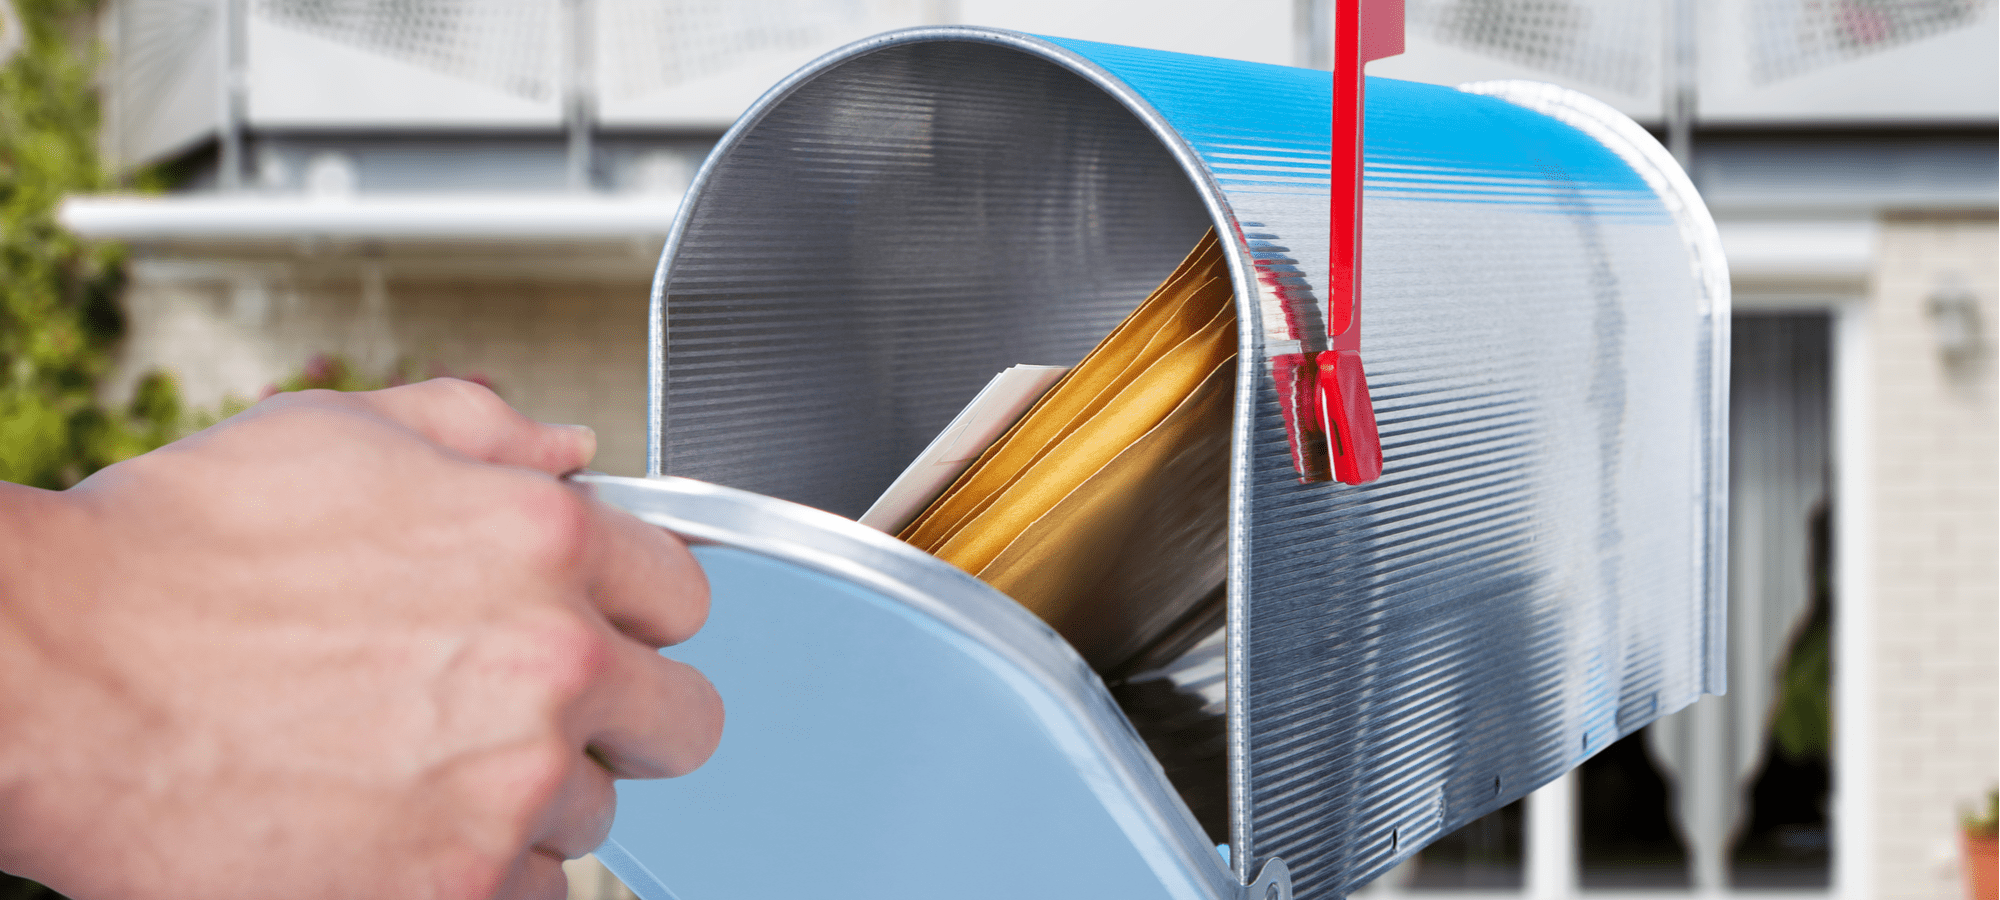 Is your dental direct mail advertising a waste of money?